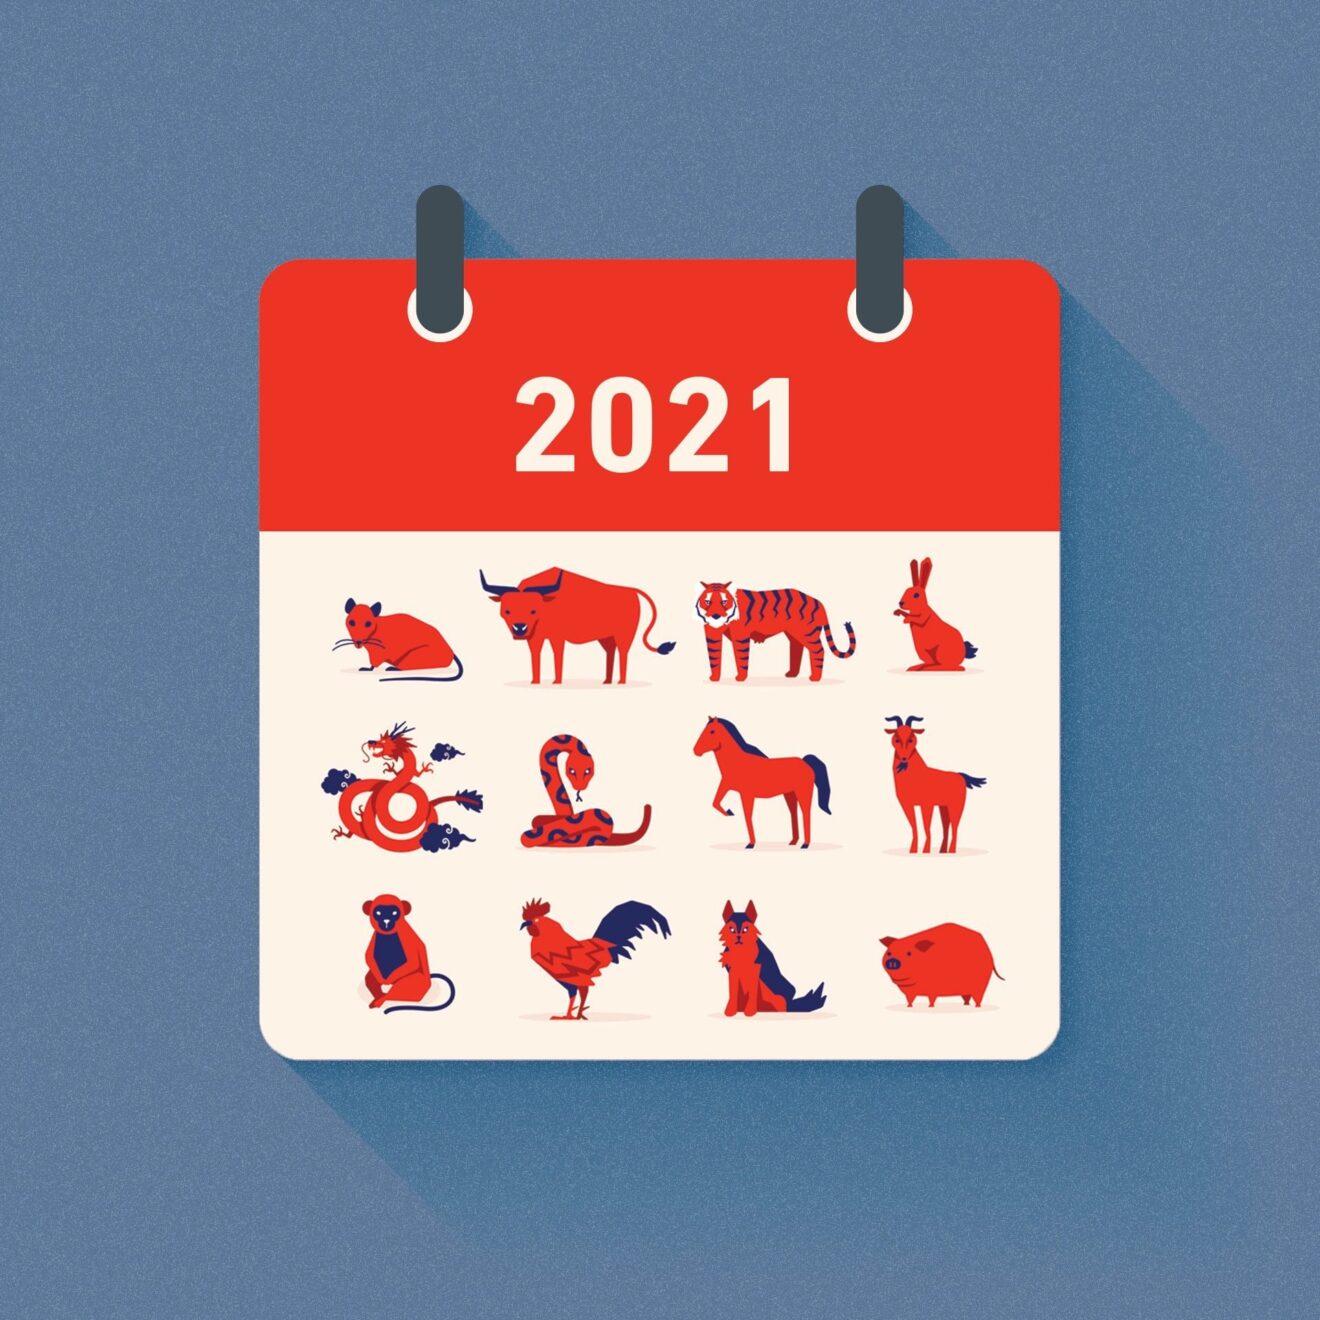 What 2021 Has in Store for You, Based on Your Chinese Zodiac Sign